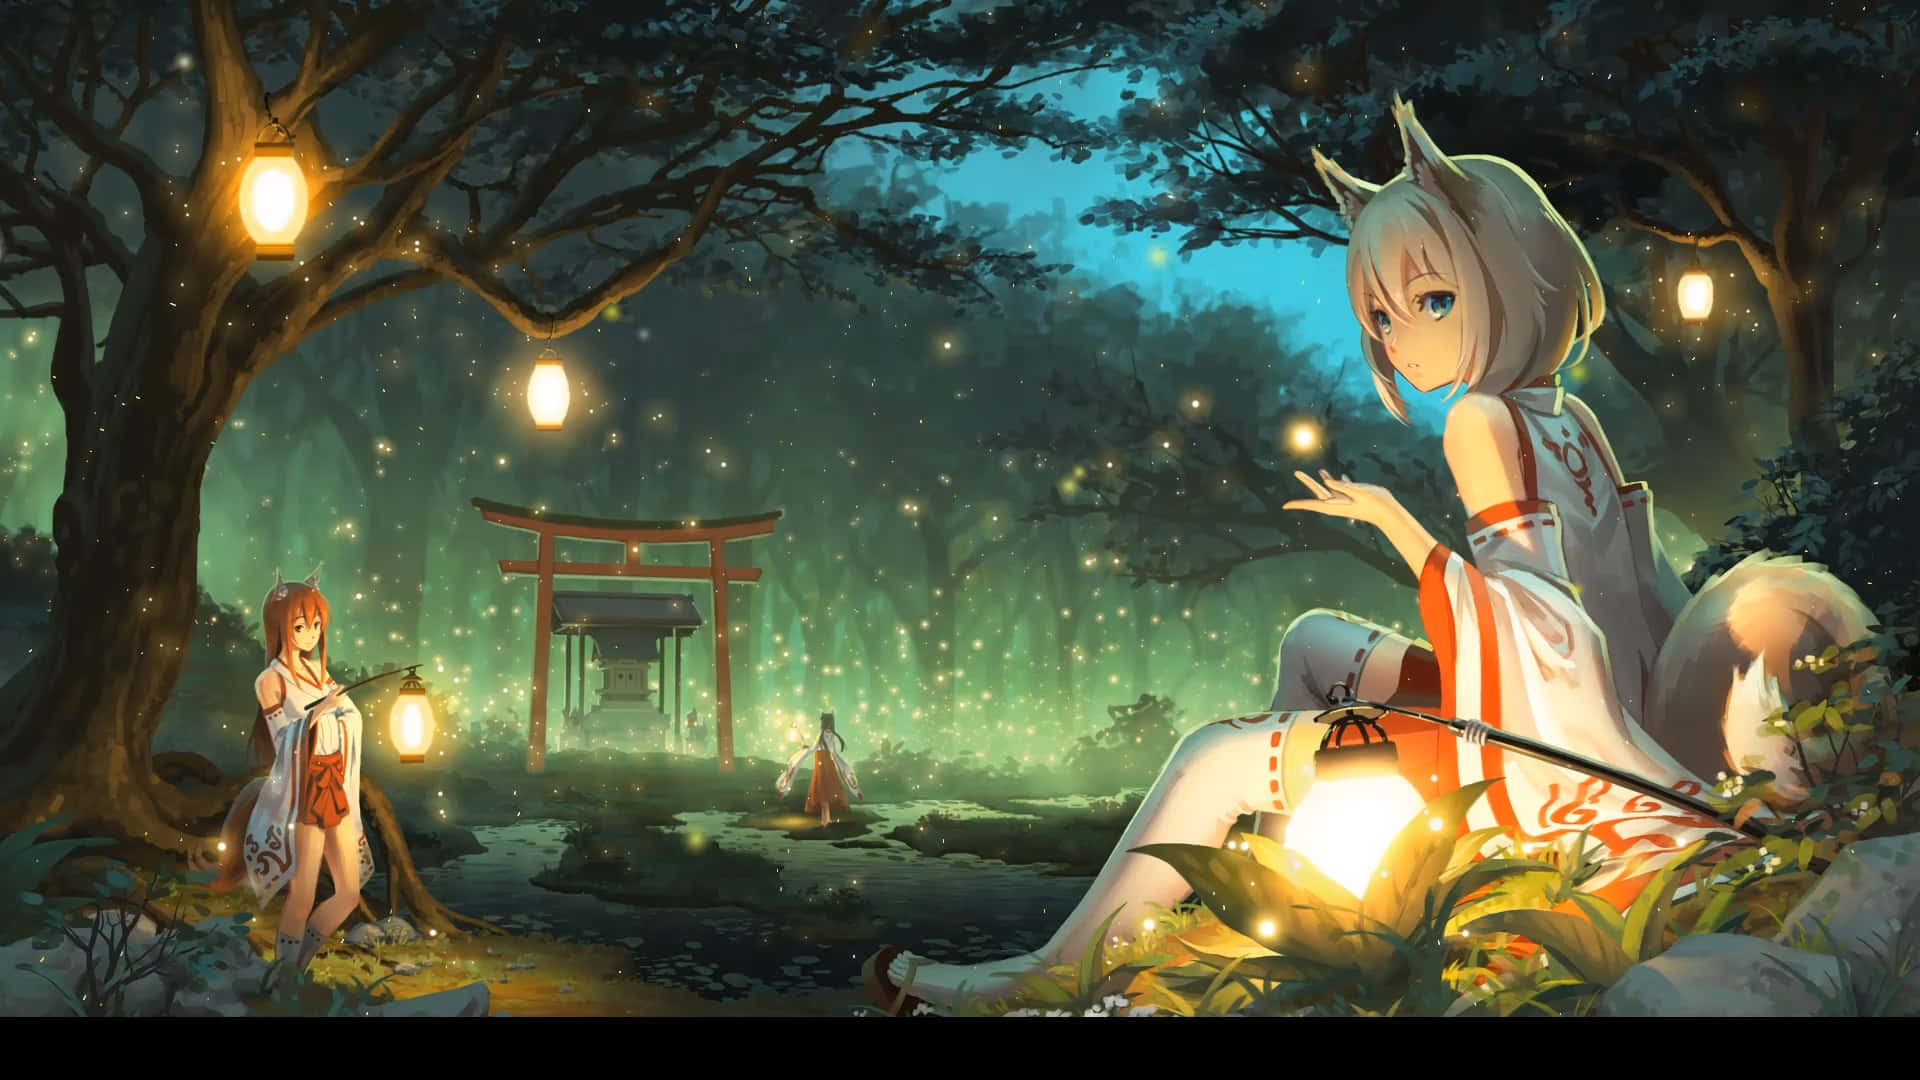 Cool Anime Fox In A Glowing Forest Wallpaper